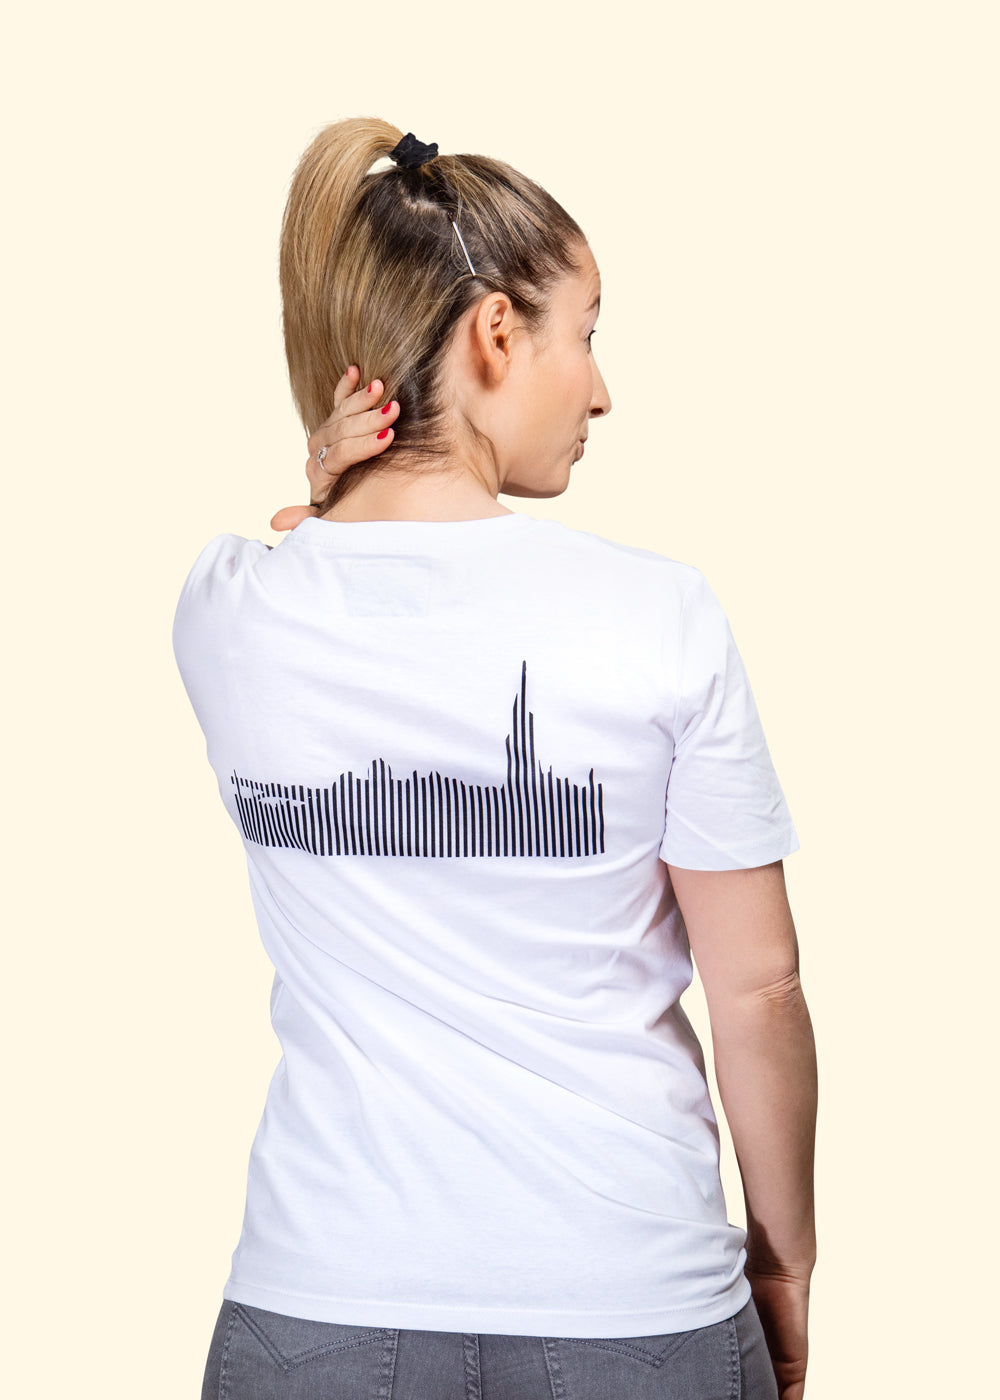 «Berner Skyline» tee - oldpassion - from prison with love